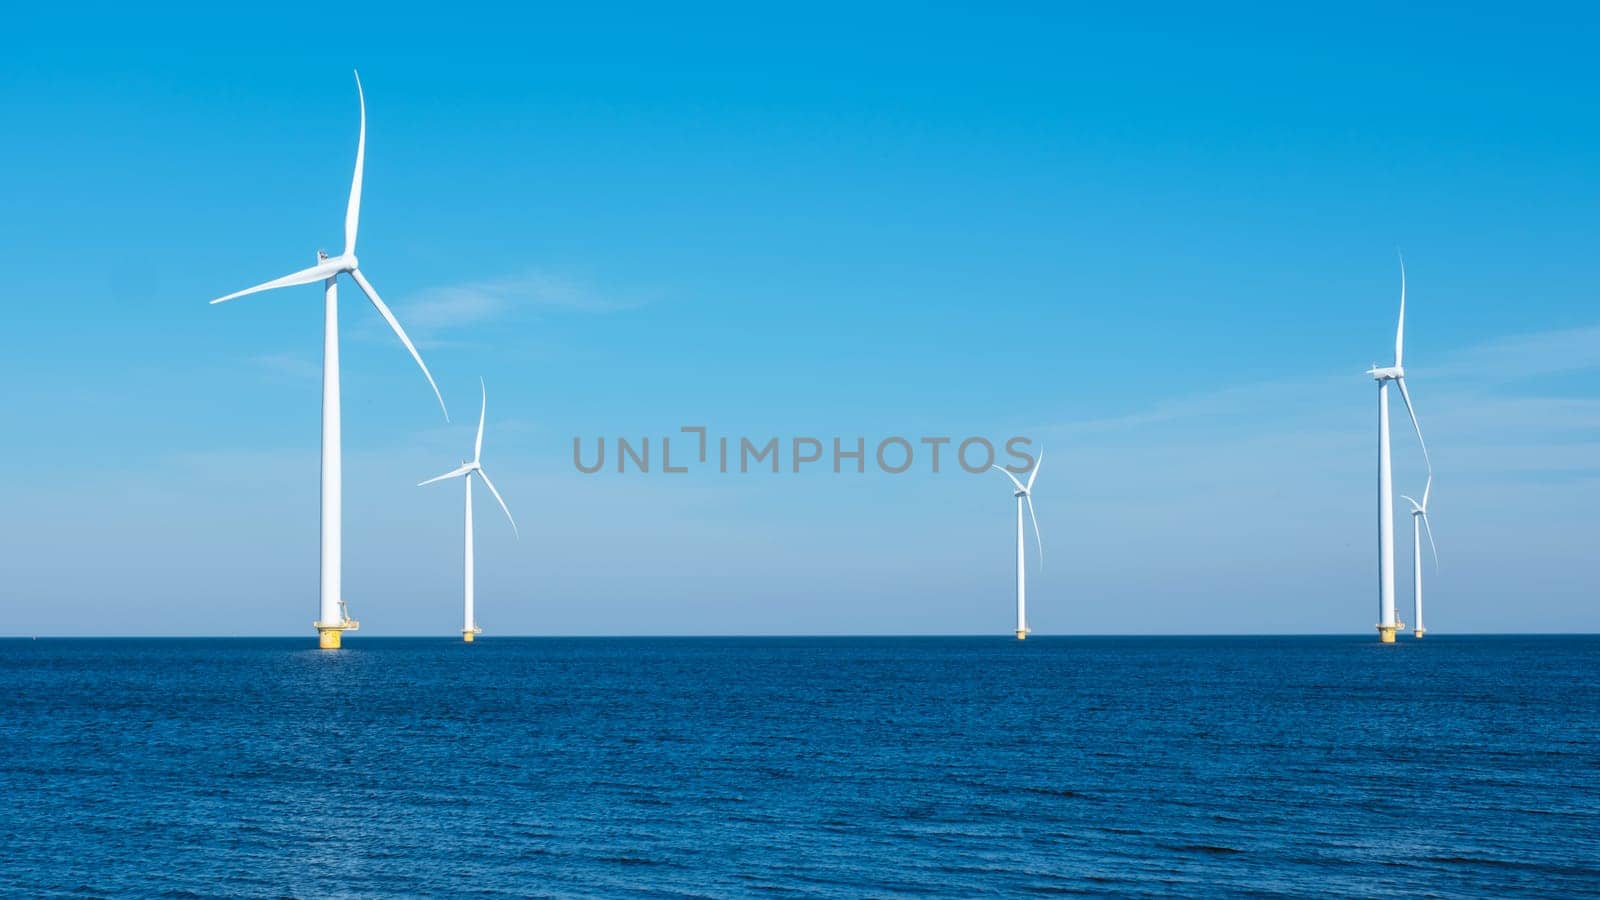 A majestic row of wind turbines rises from the ocean in the Netherlands Flevoland, harnessing the power of the wind to generate clean energy by fokkebok